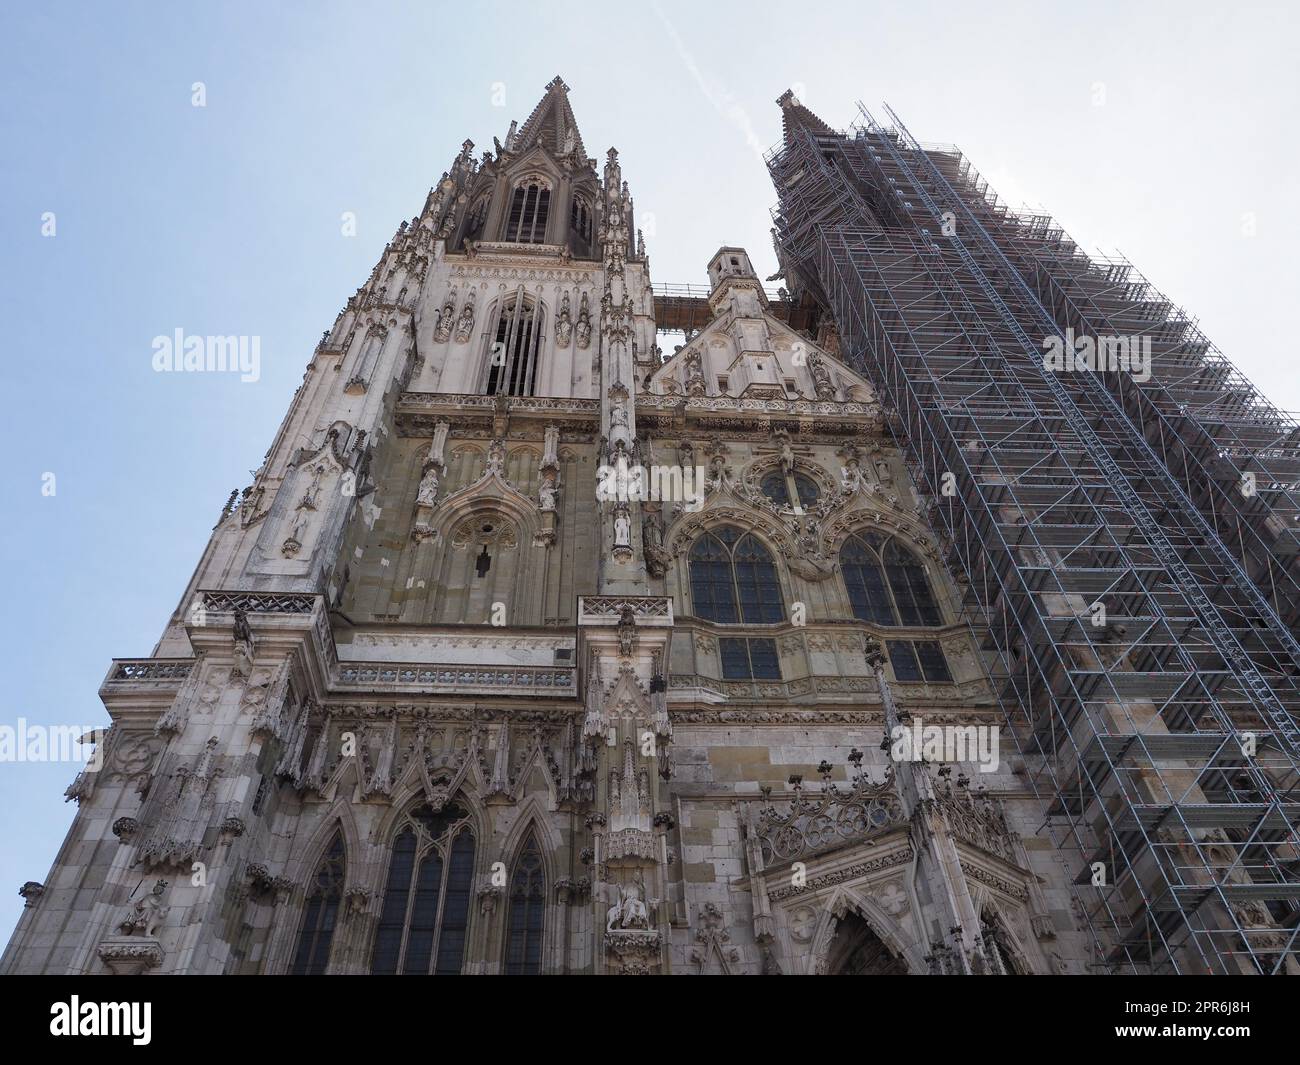 Regensburger Dom aka St Peter cathedral church in Regensburg, Germany Stock Photo